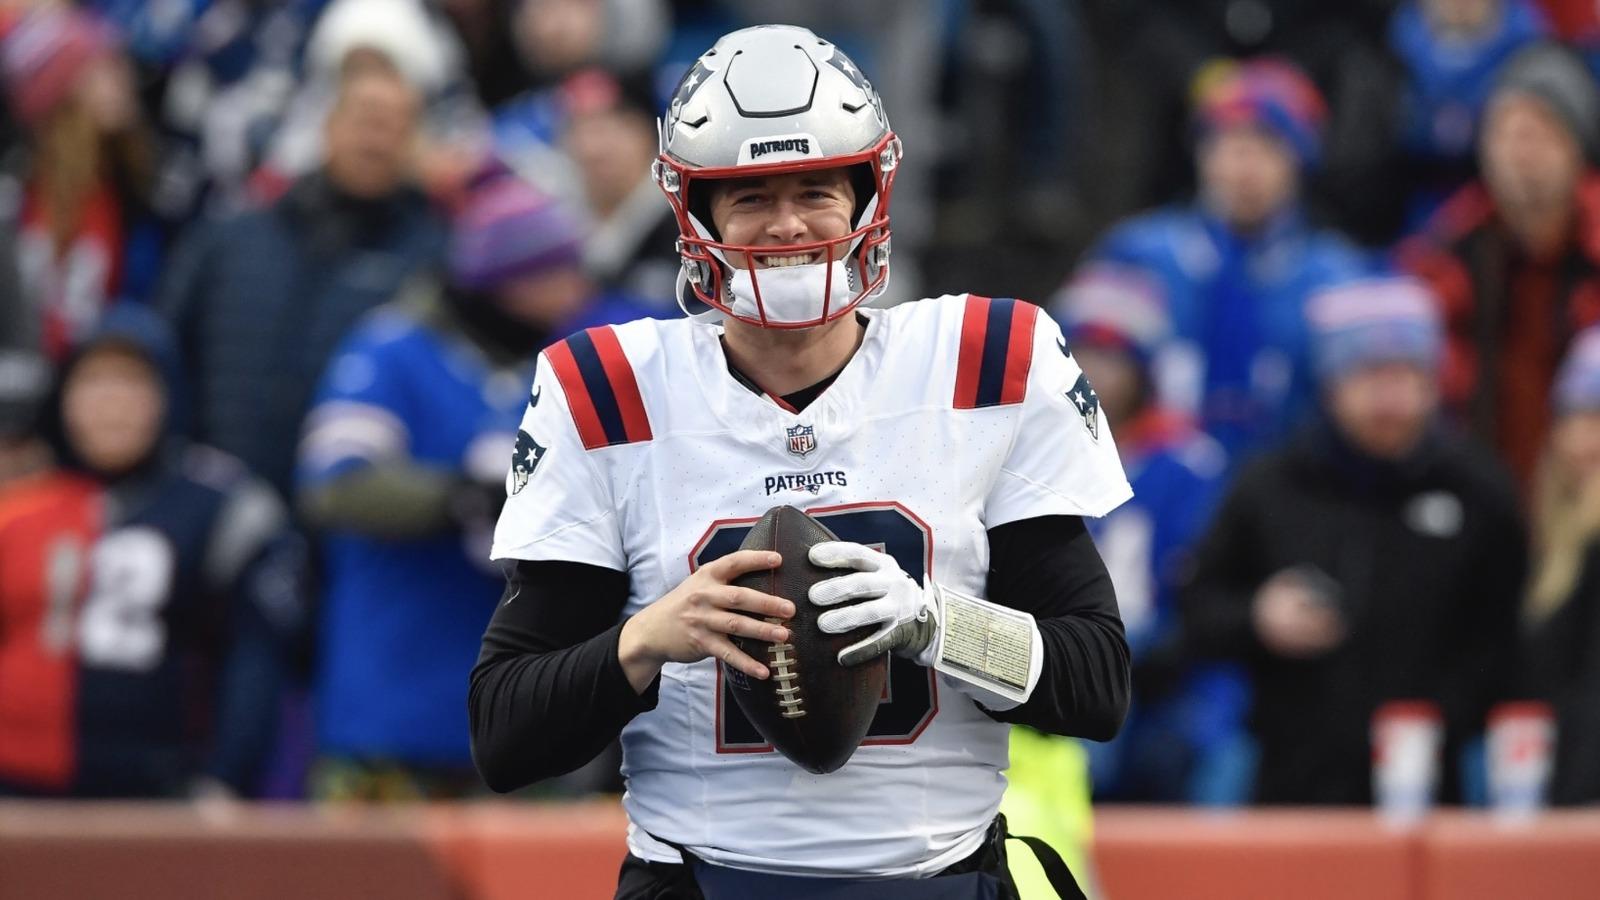 The Patriots will field trade offers for quarterback Mac Jones and fans are throwing shots on social media